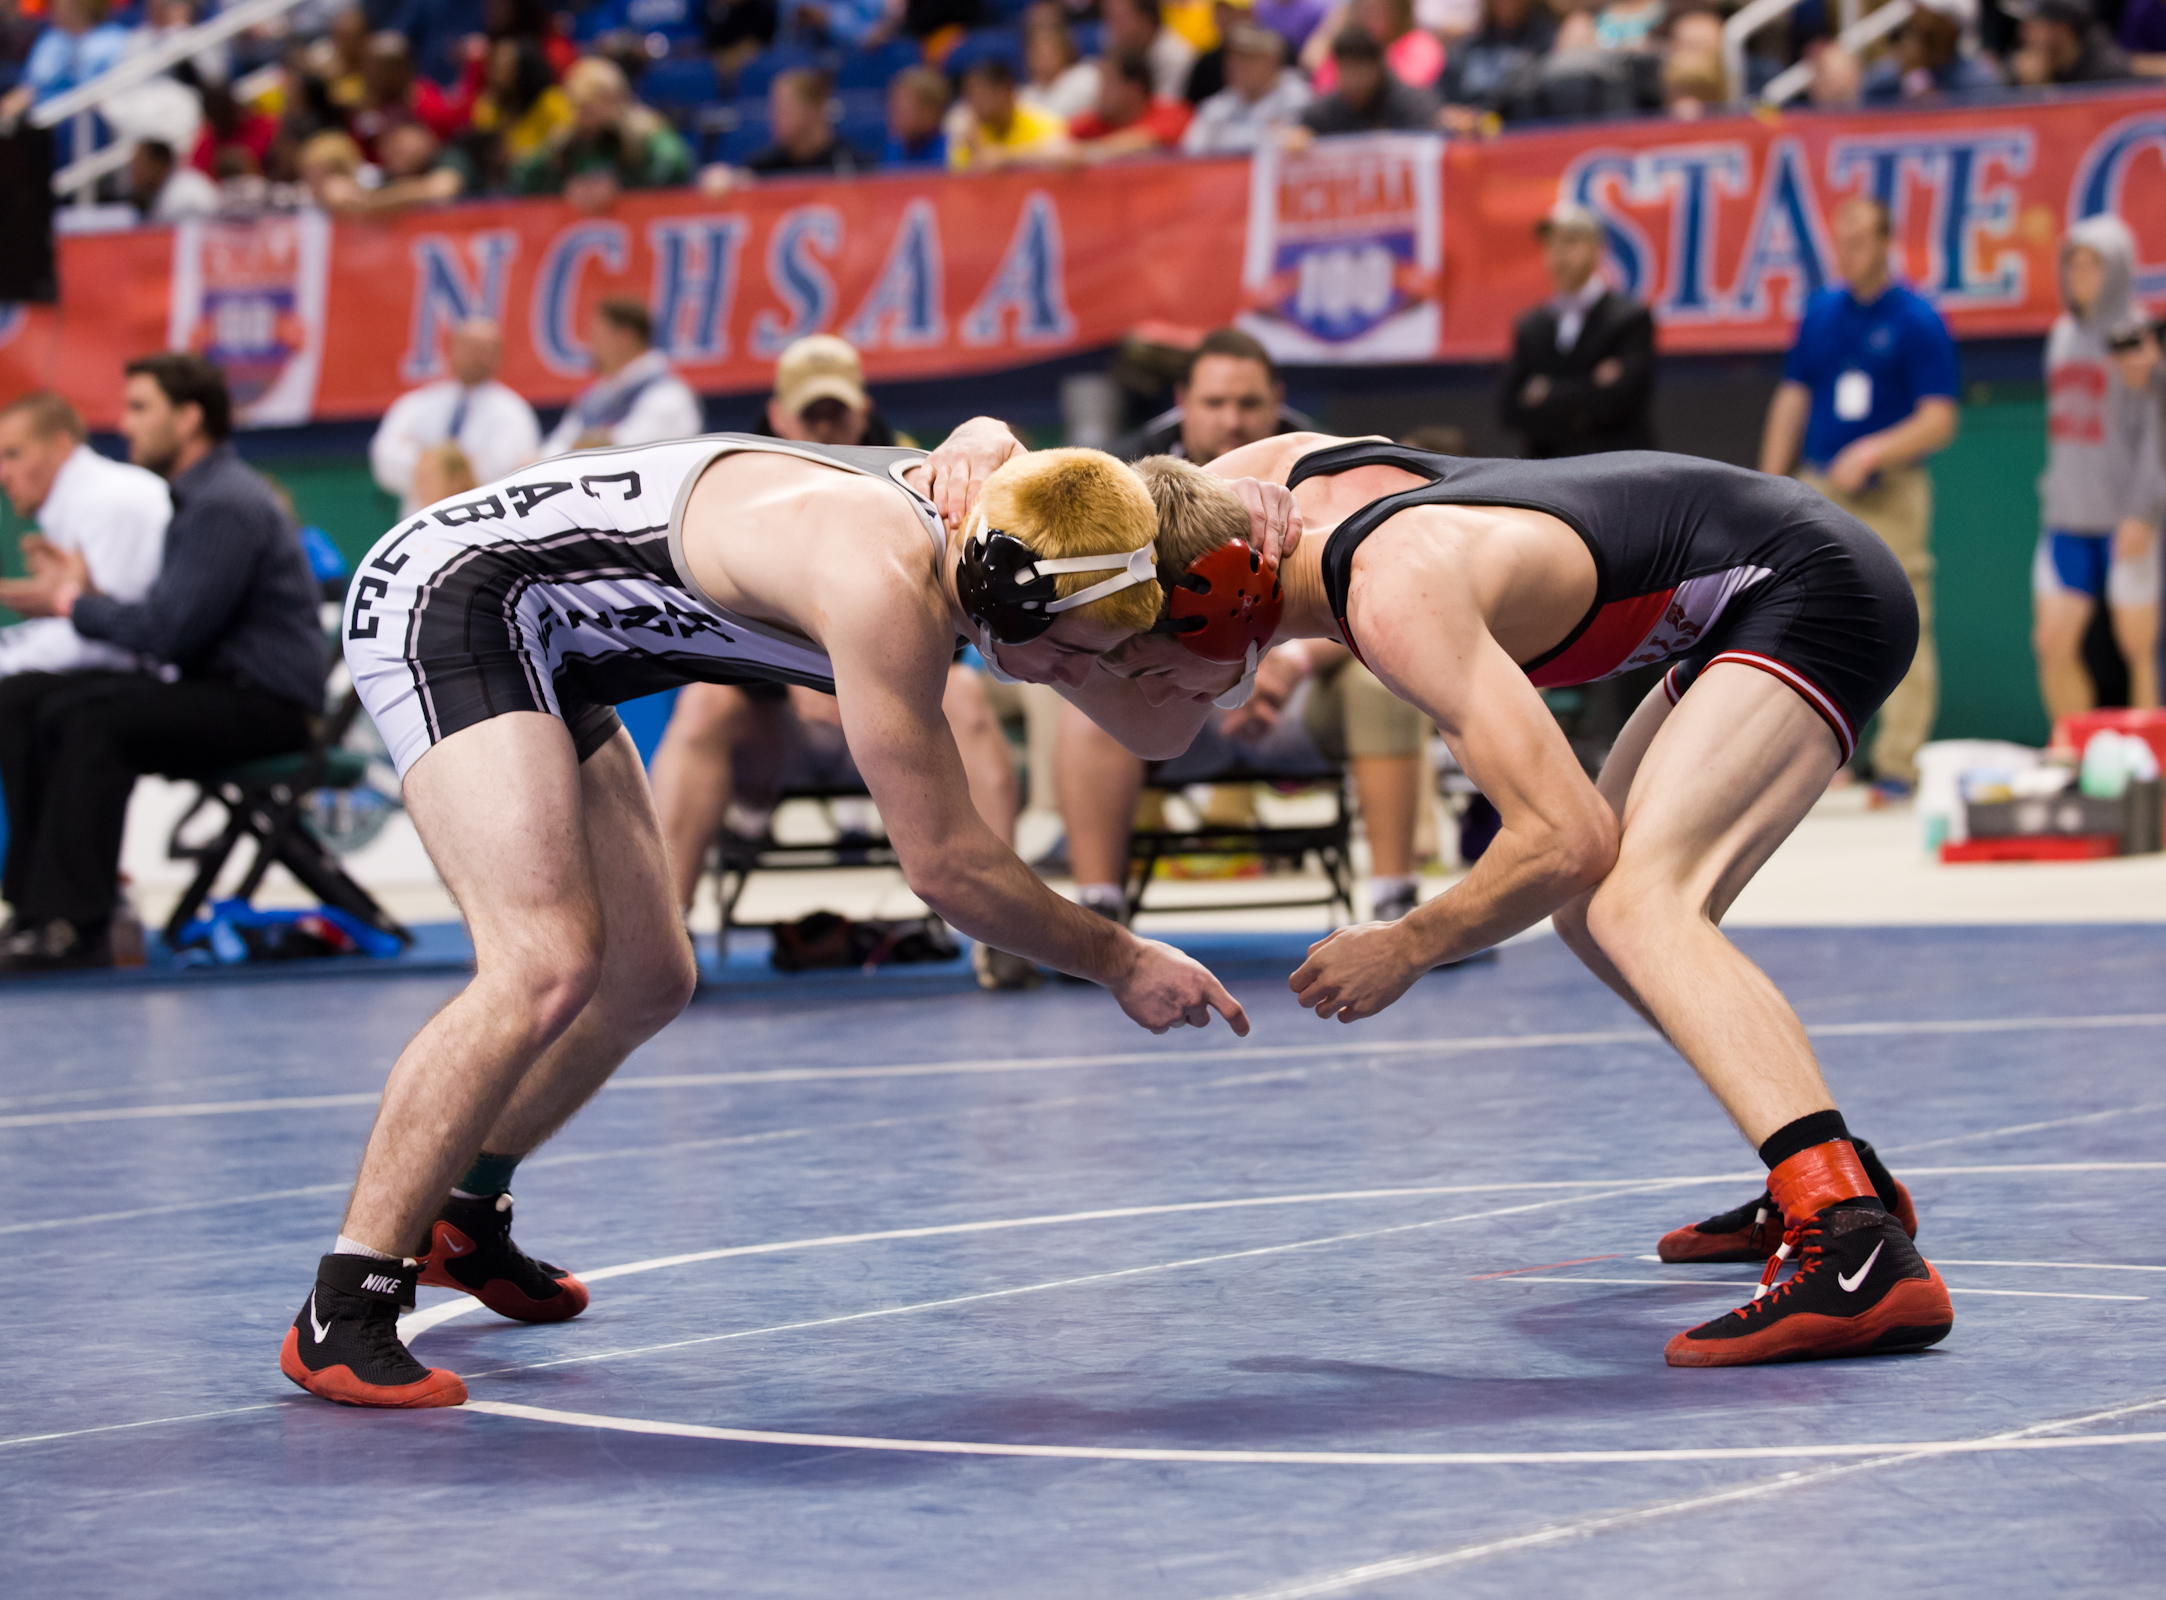 NCHSAA State Wrestling Championships At Greensboro Coliseum Slated To